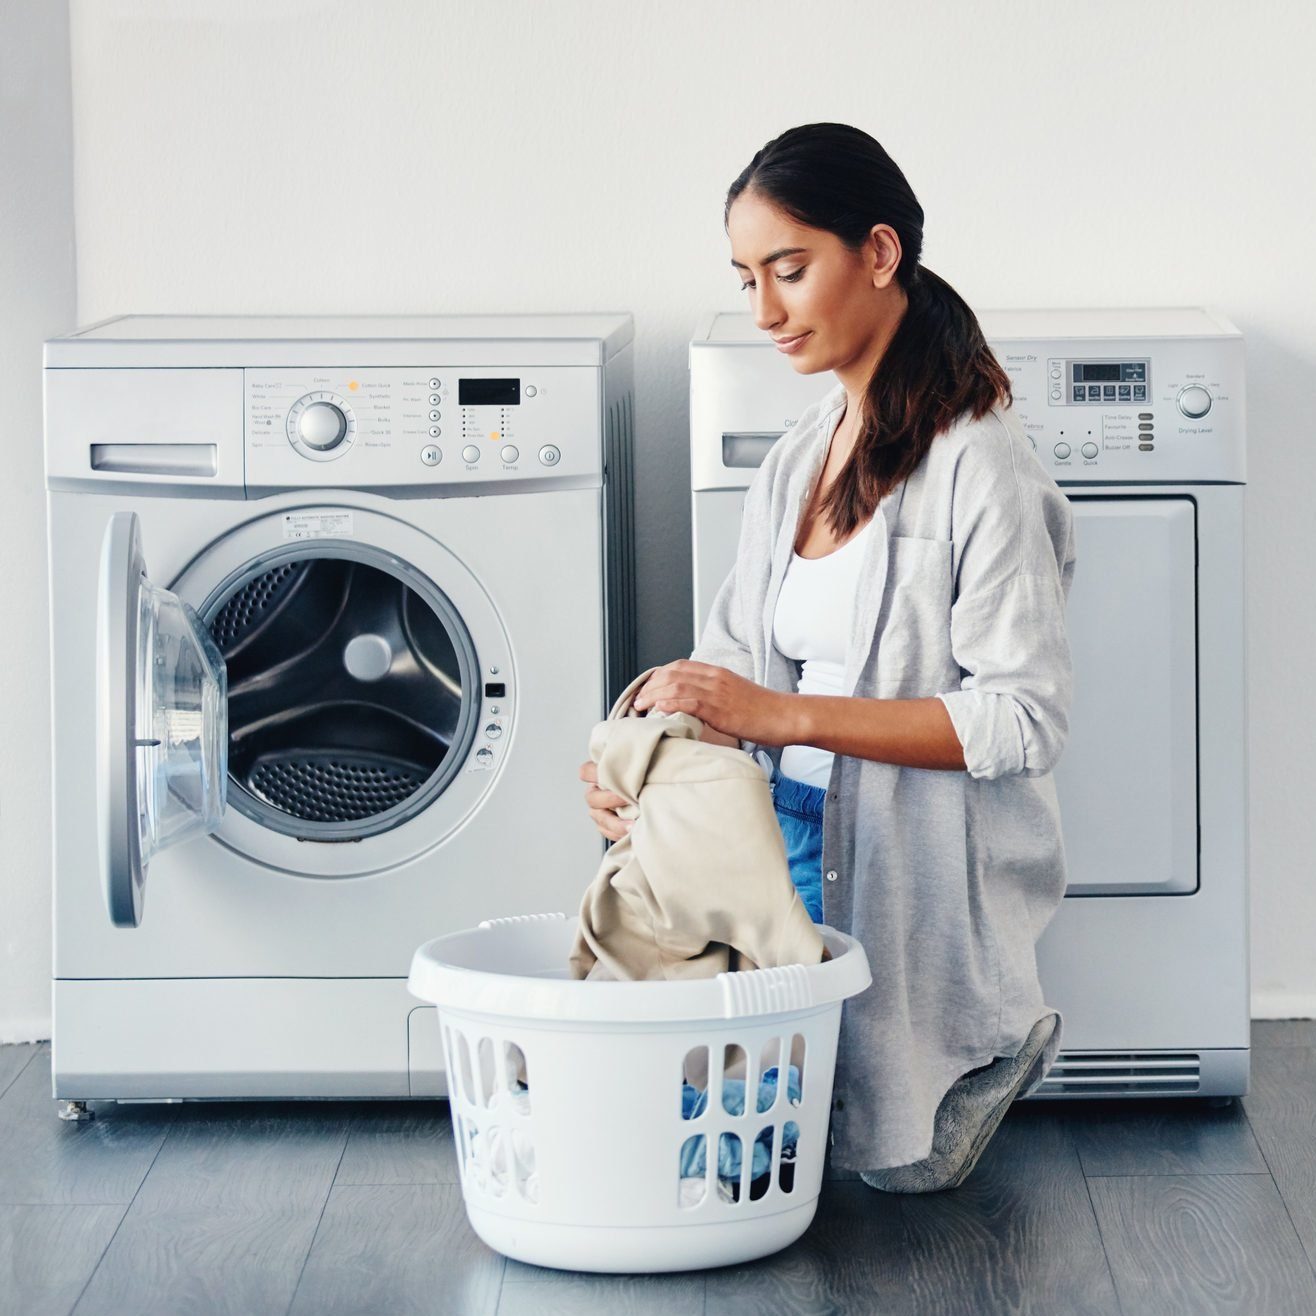 Dryer Not Drying? 7 Reasons & Remedies for Longer Drying Times